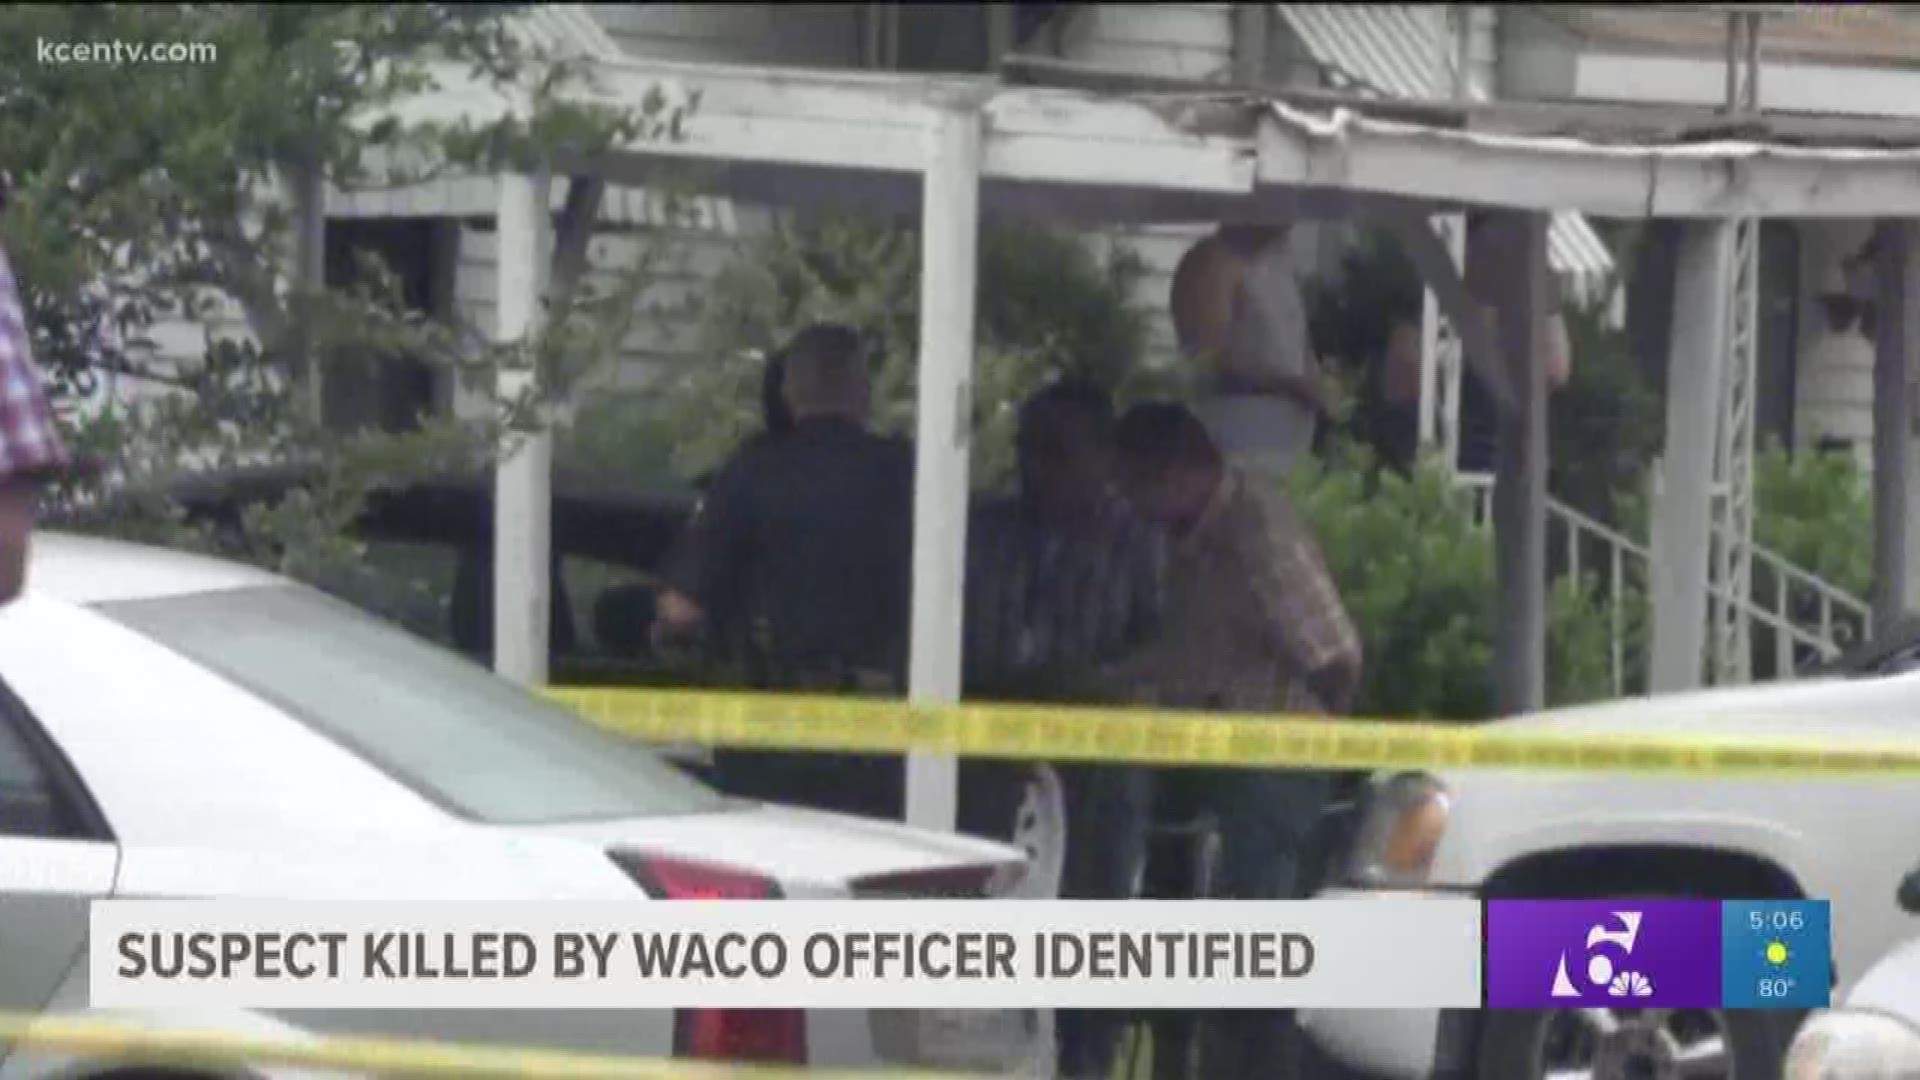 Waco police have now identified the armed man killed in an officer-involved shooting. 